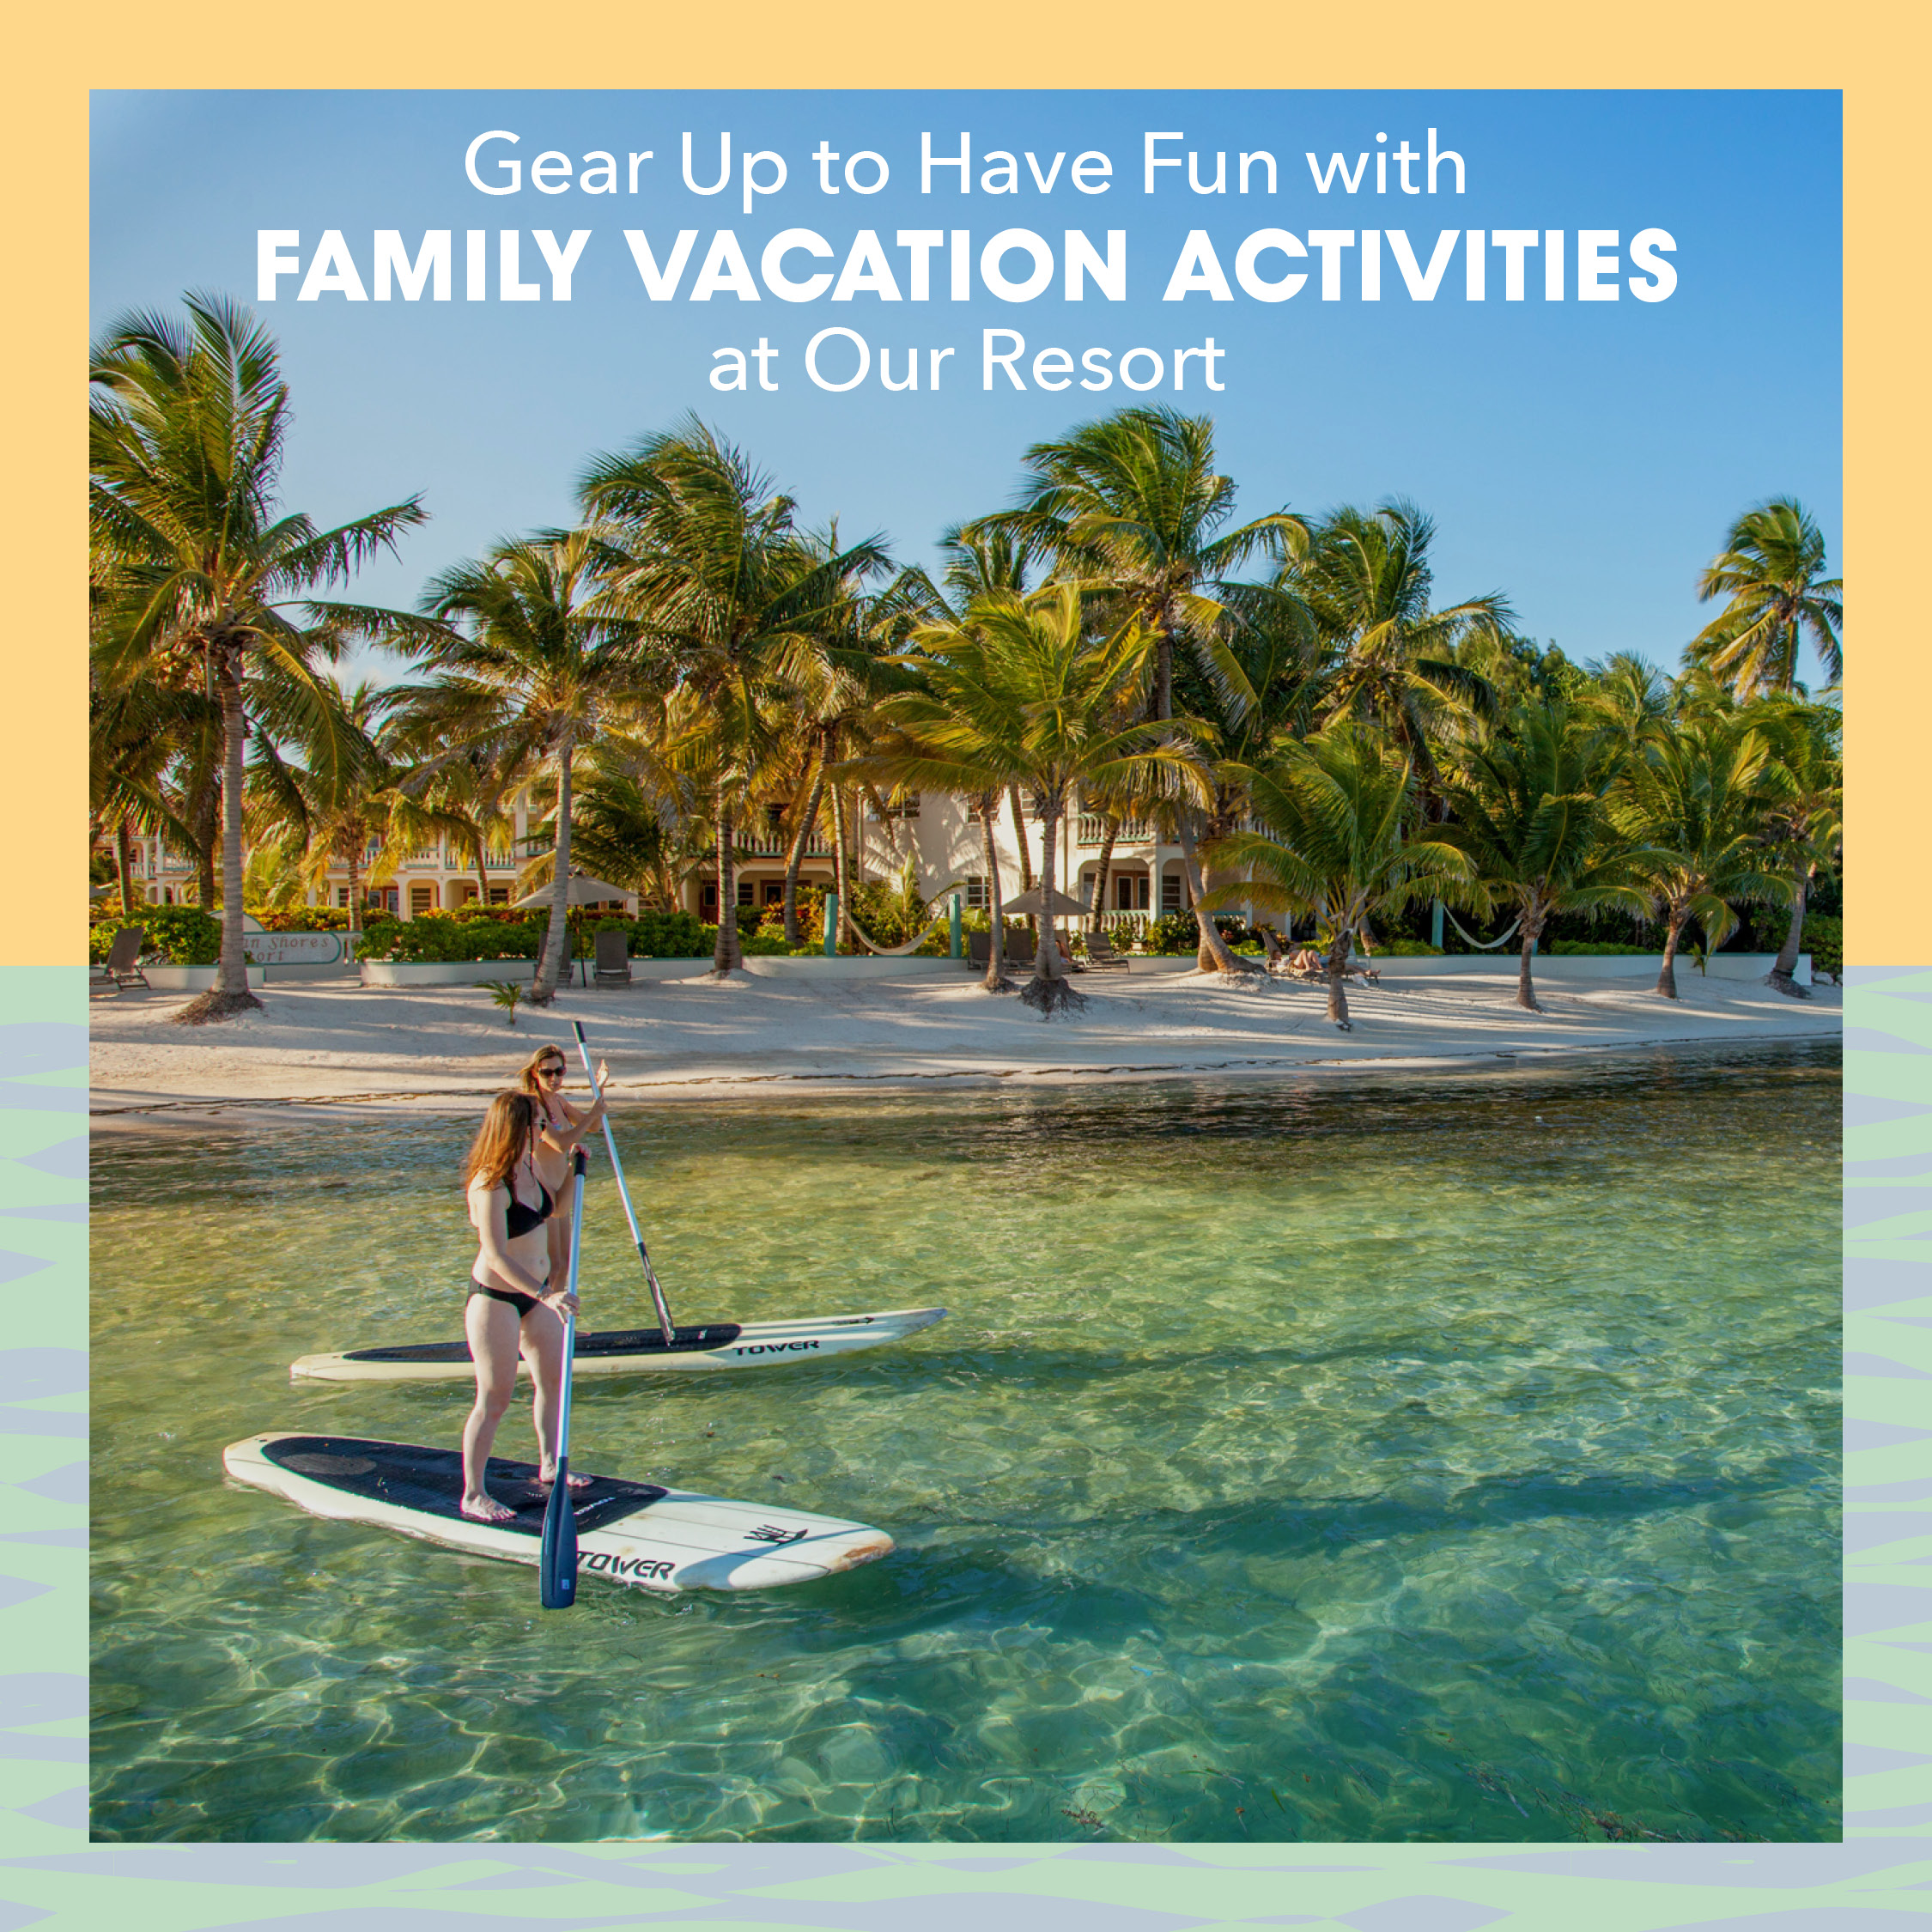 Gear Up To Have Fun with family vacation activities at our resort